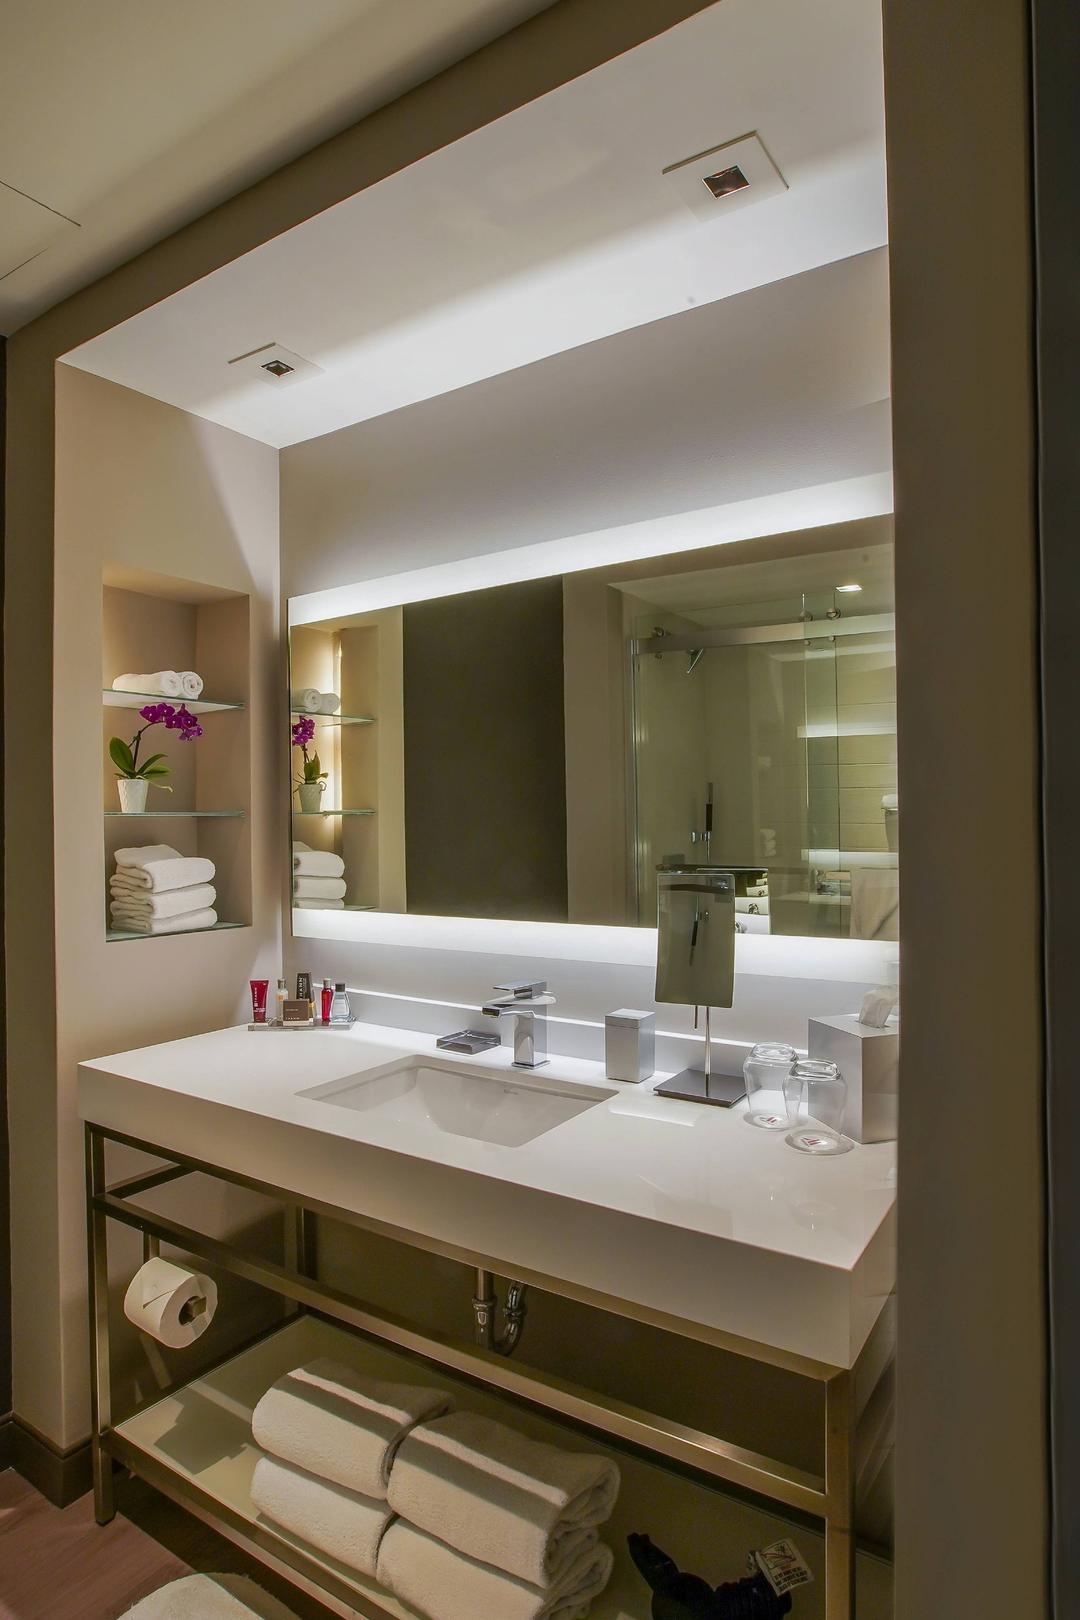 Our resort's cabana bathrooms feature luxurious amenities to help you stay refreshed during your vacation in Puerto Rico.